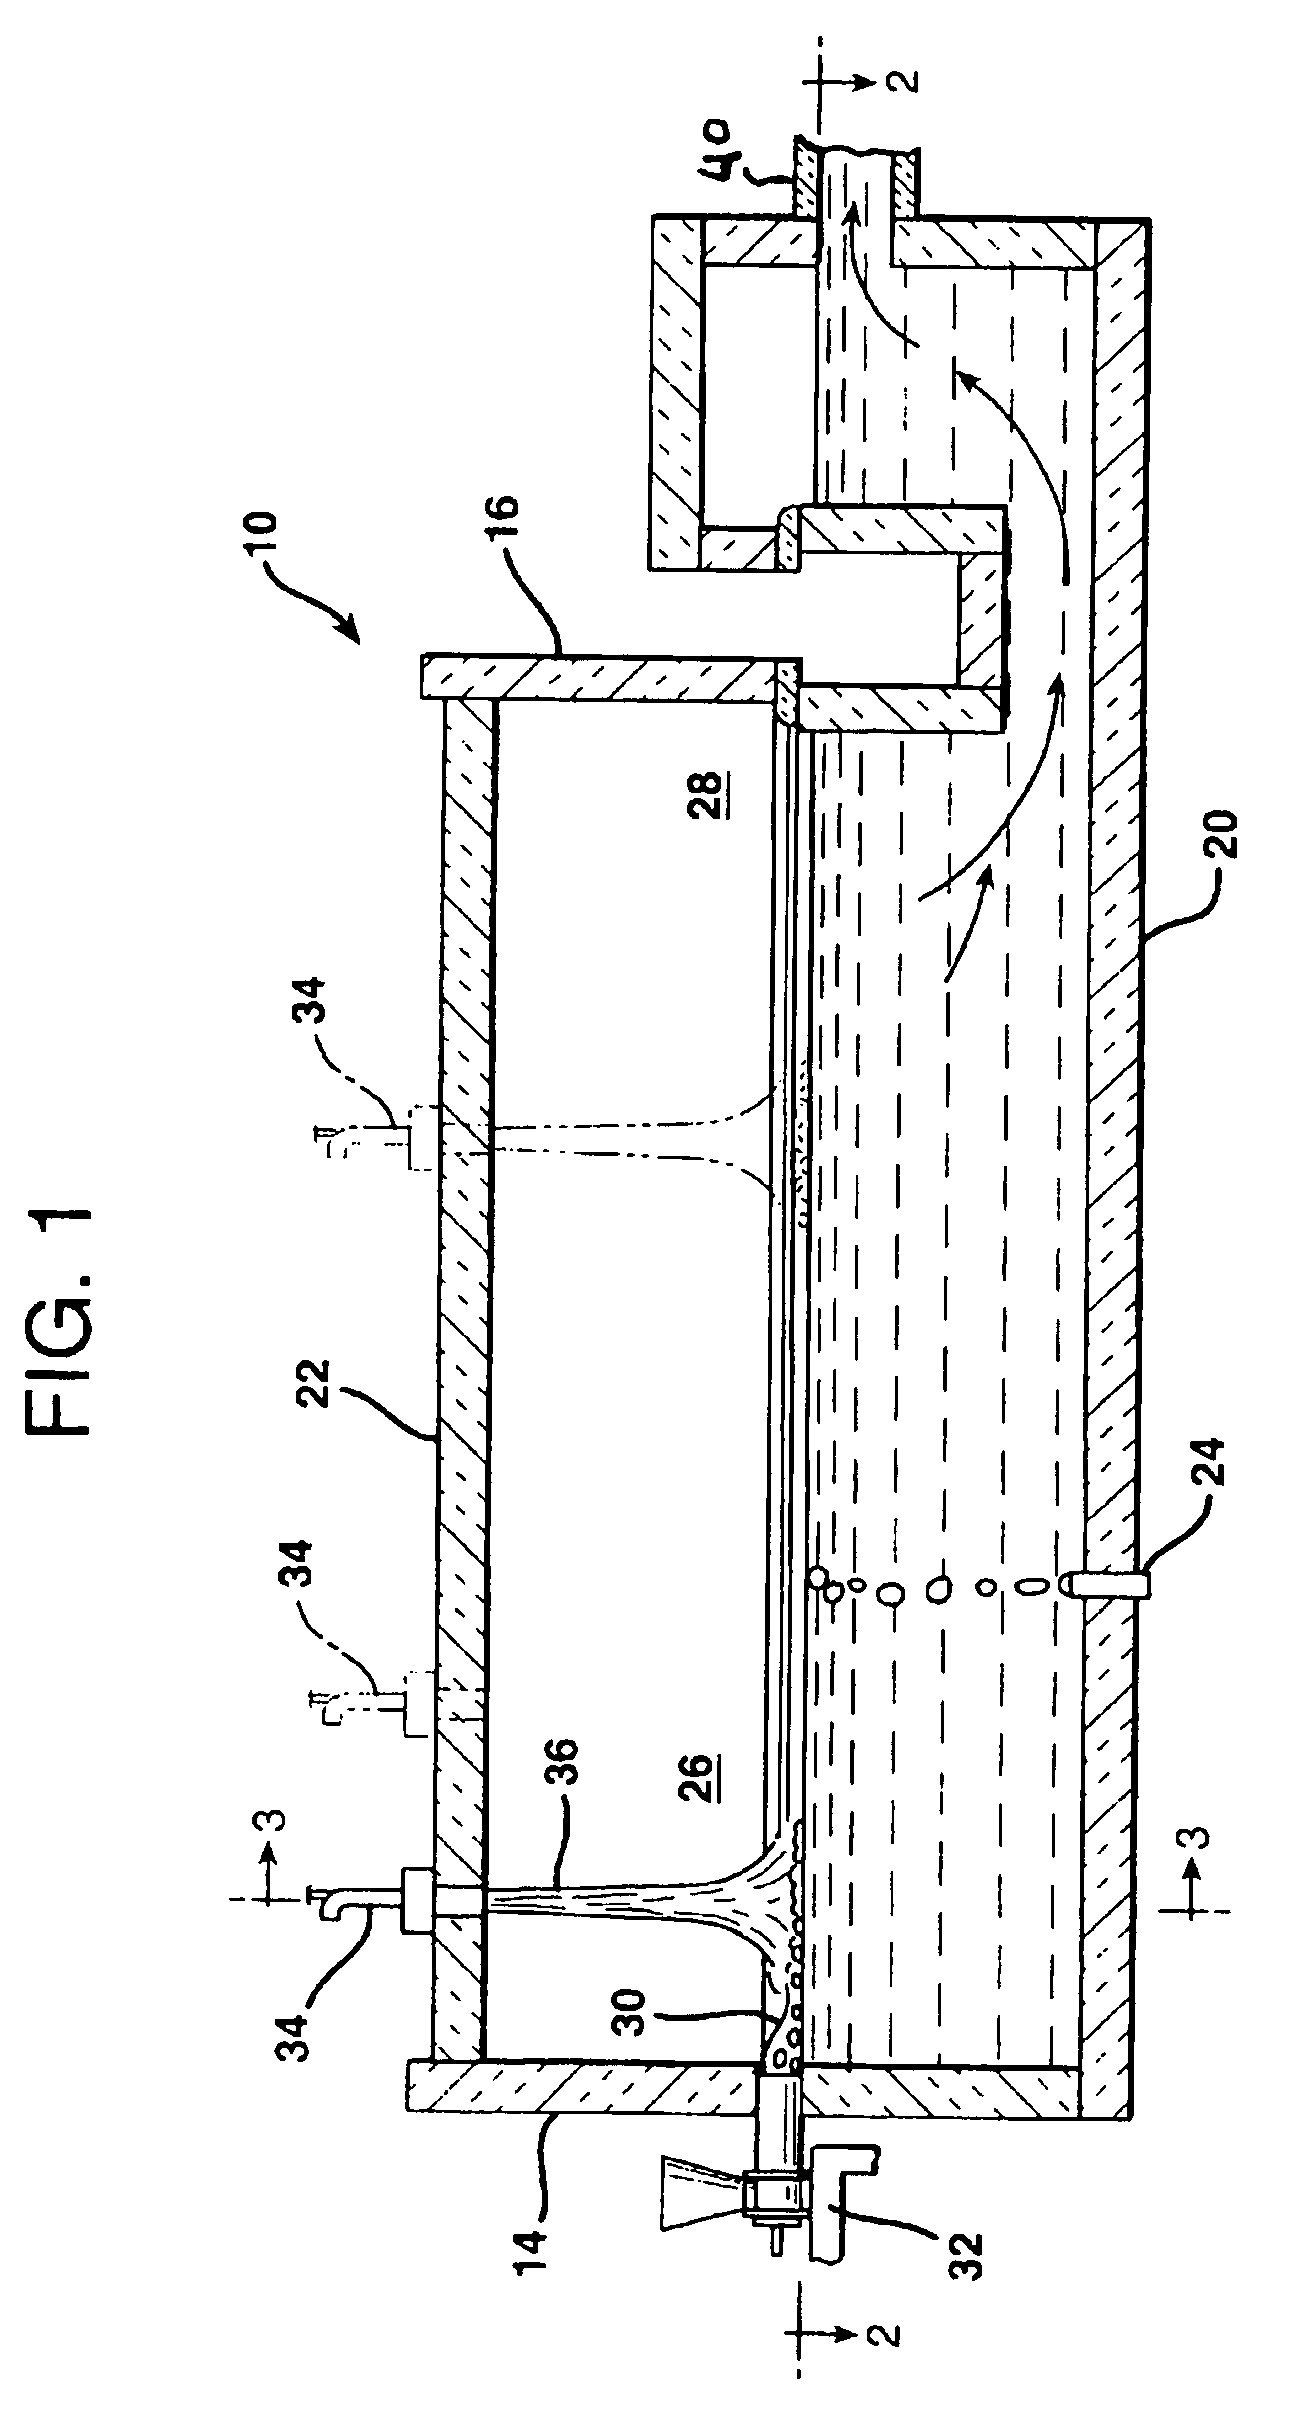 Method of manufacturing high performance glass fibers in a refractory lined melter and fiber formed thereby